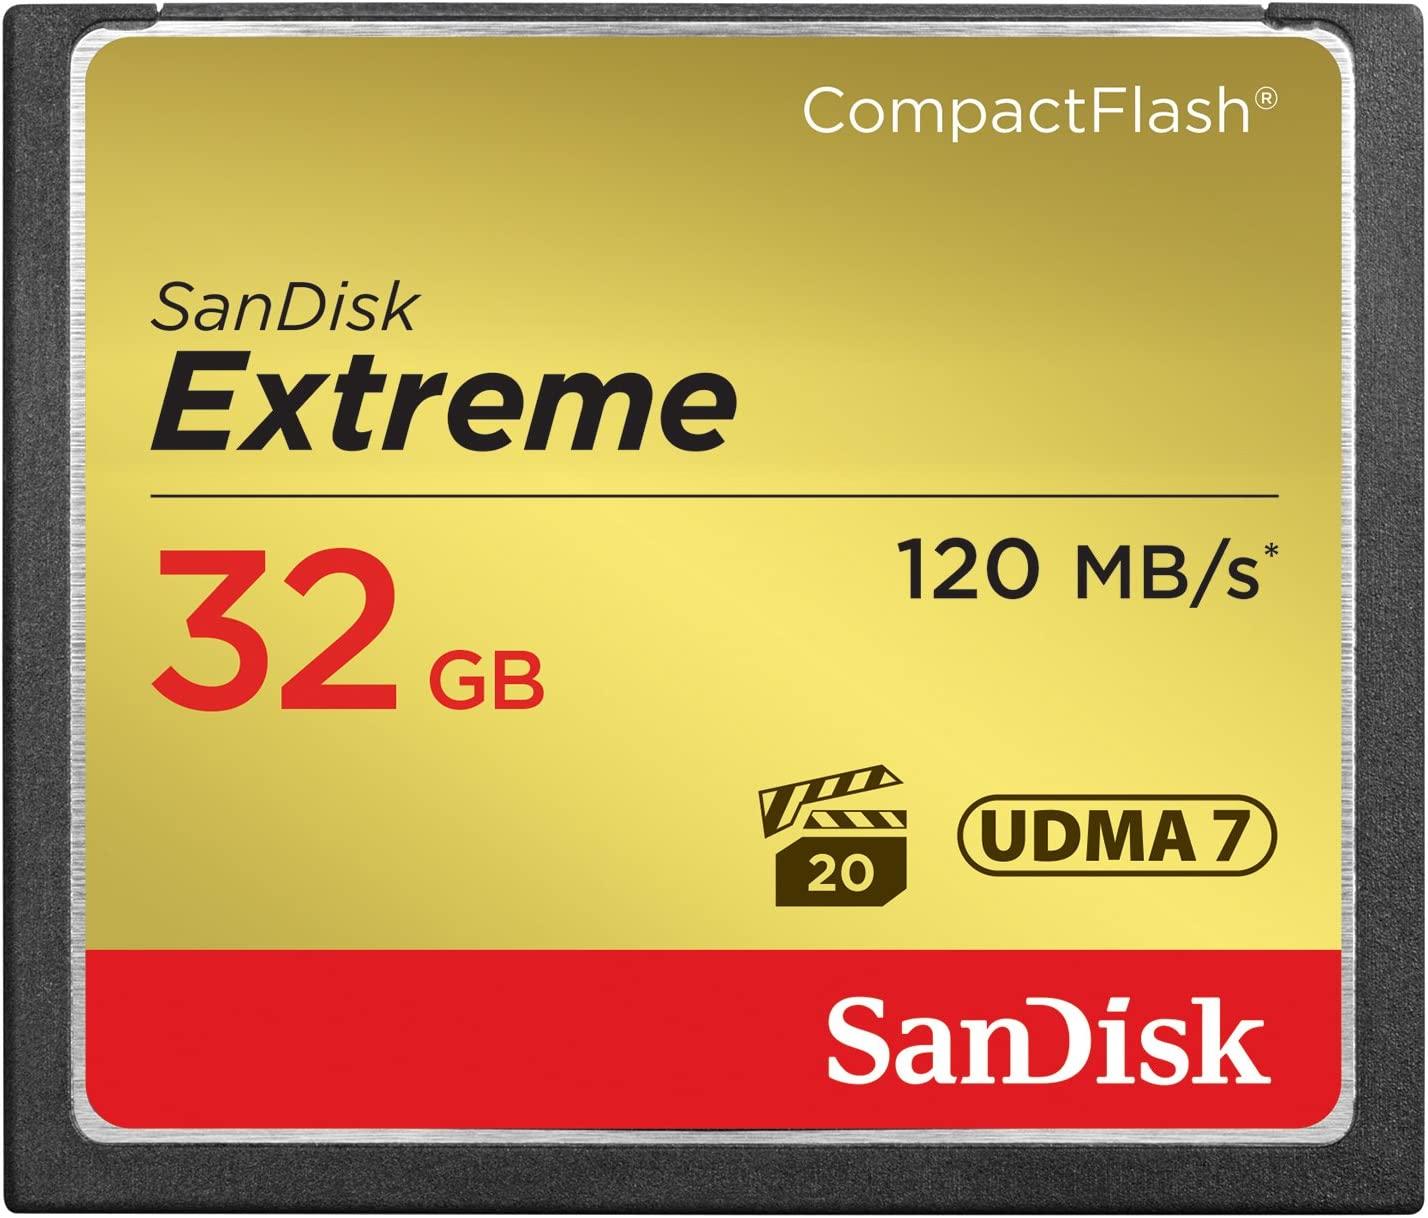 SANDISK 32GB COMPACT FLASH CARD EXTREME # SDCFXSB-032G-G46